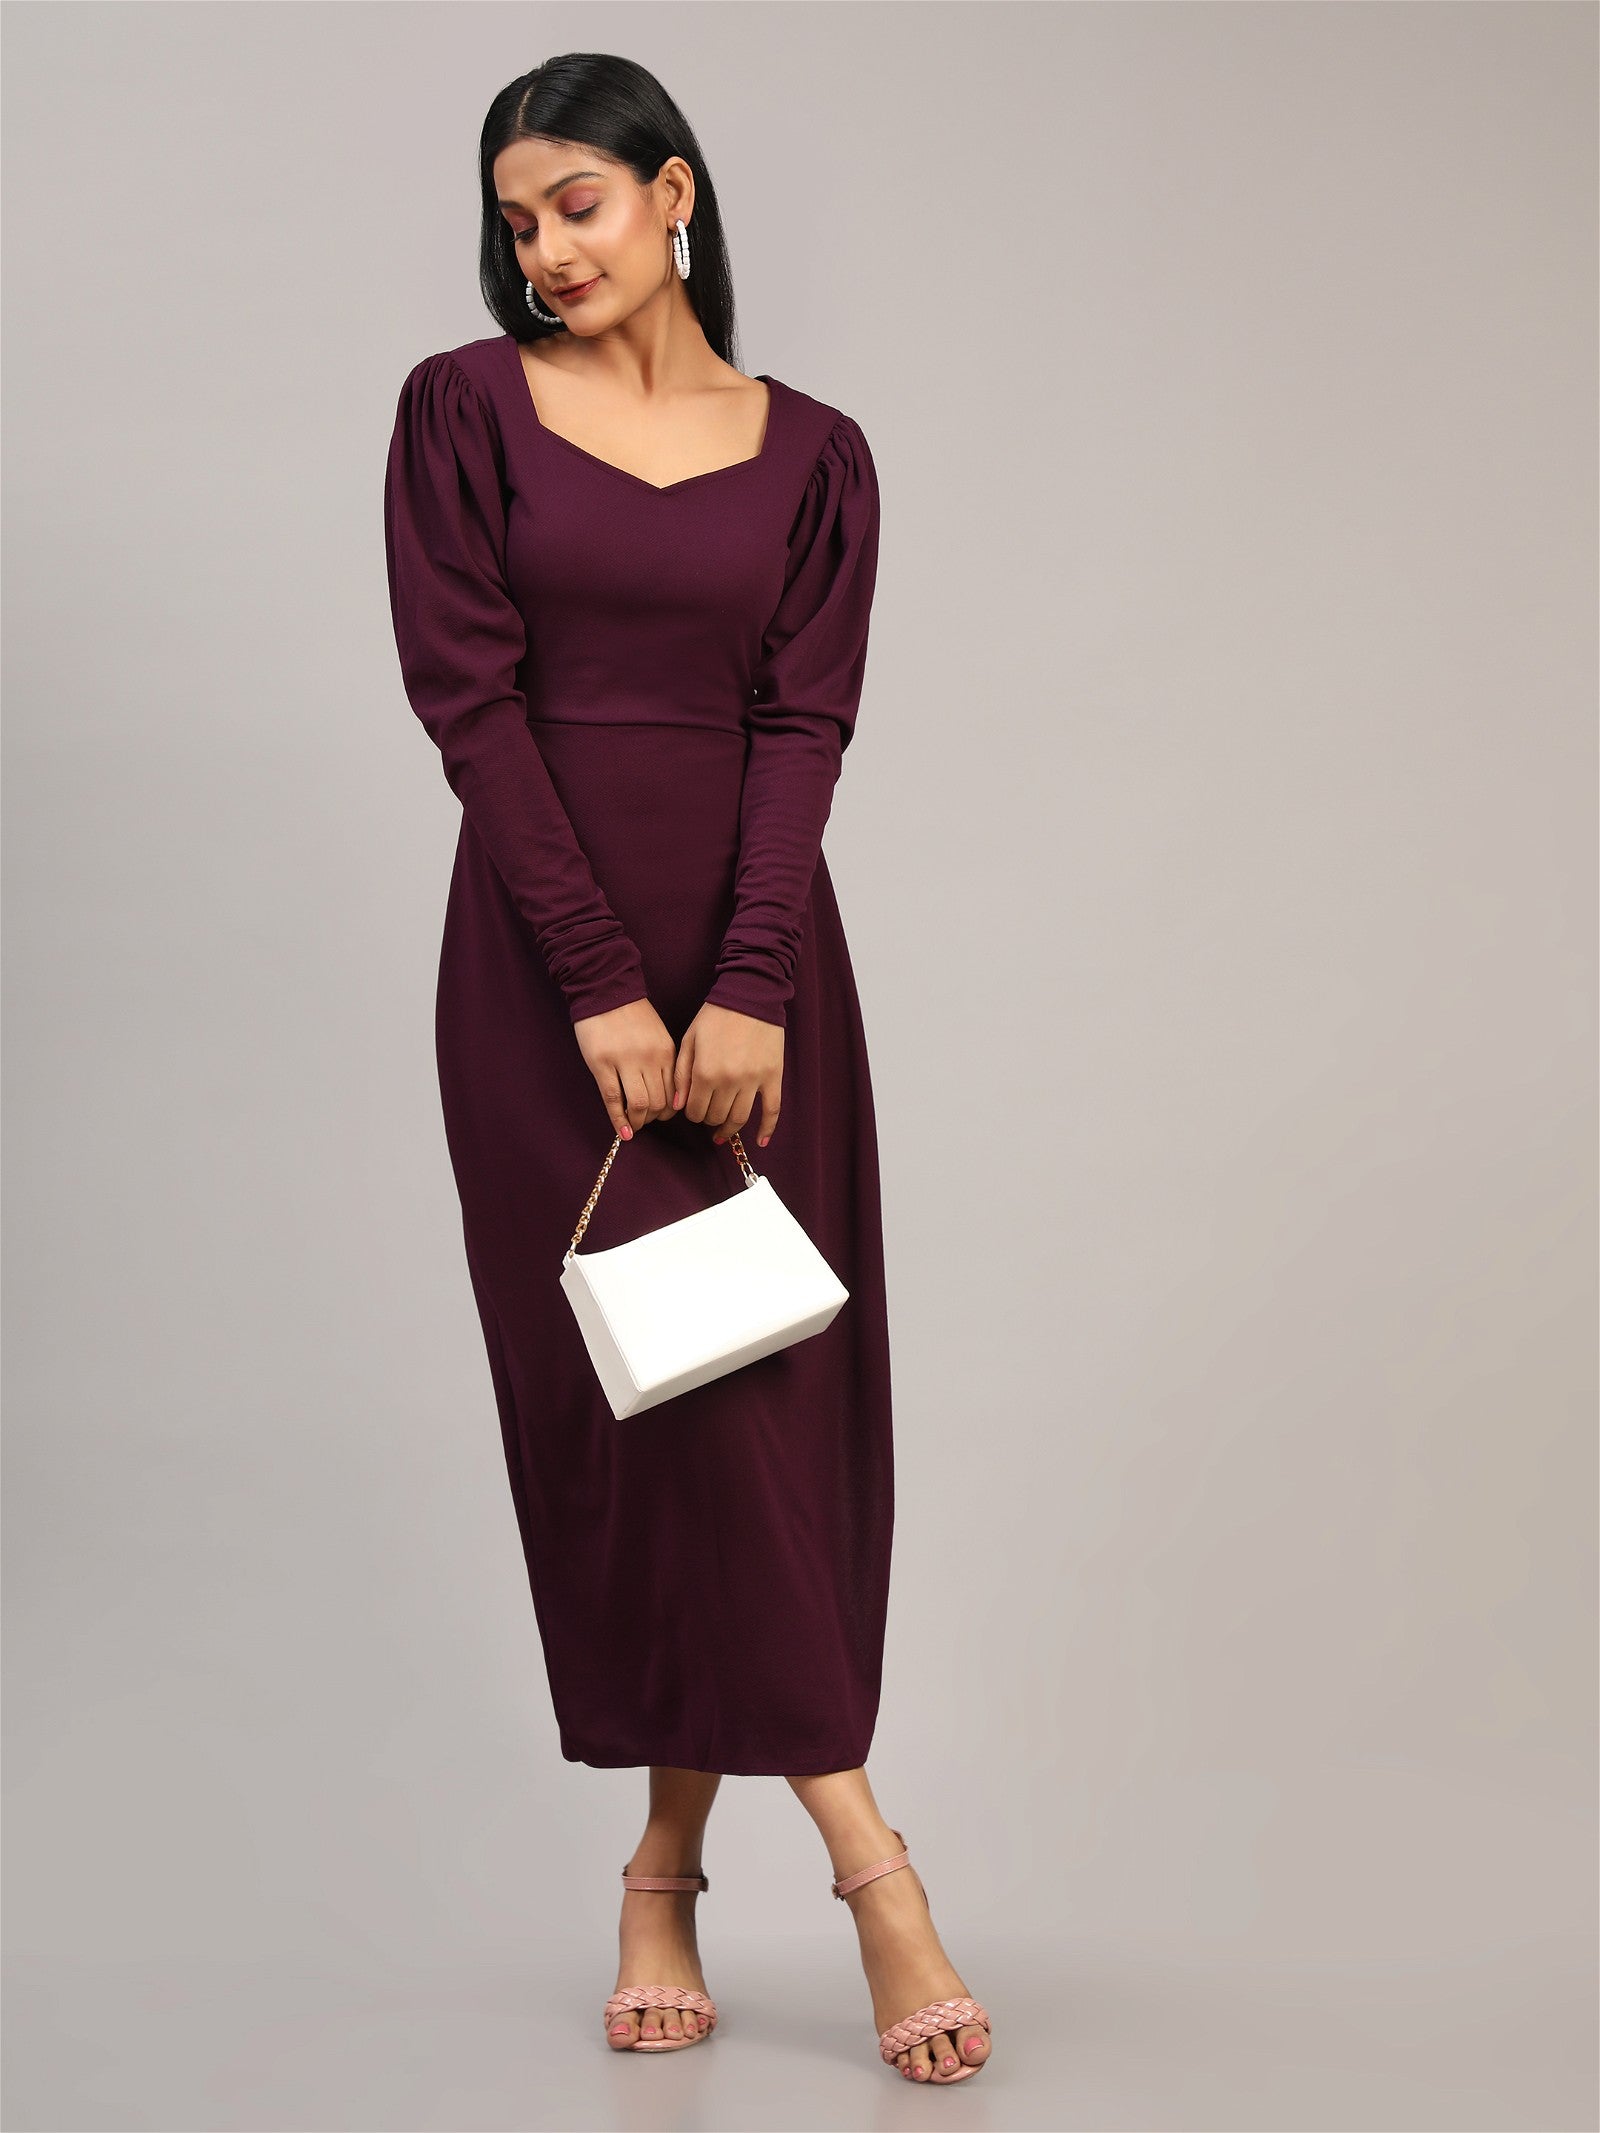 The model in the image is wearing Cotton Lycra tops Western Wear Collection from Alice Milan. Crafted with the finest materials and impeccable attention to detail, the Dress looks premium, trendy, luxurious and offers unparalleled comfort. It’s a perfect clothing option for loungewear, resort wear, party wear or for an airport look. The woman in the image looks happy, and confident with her style statement putting a happy smile on her face.